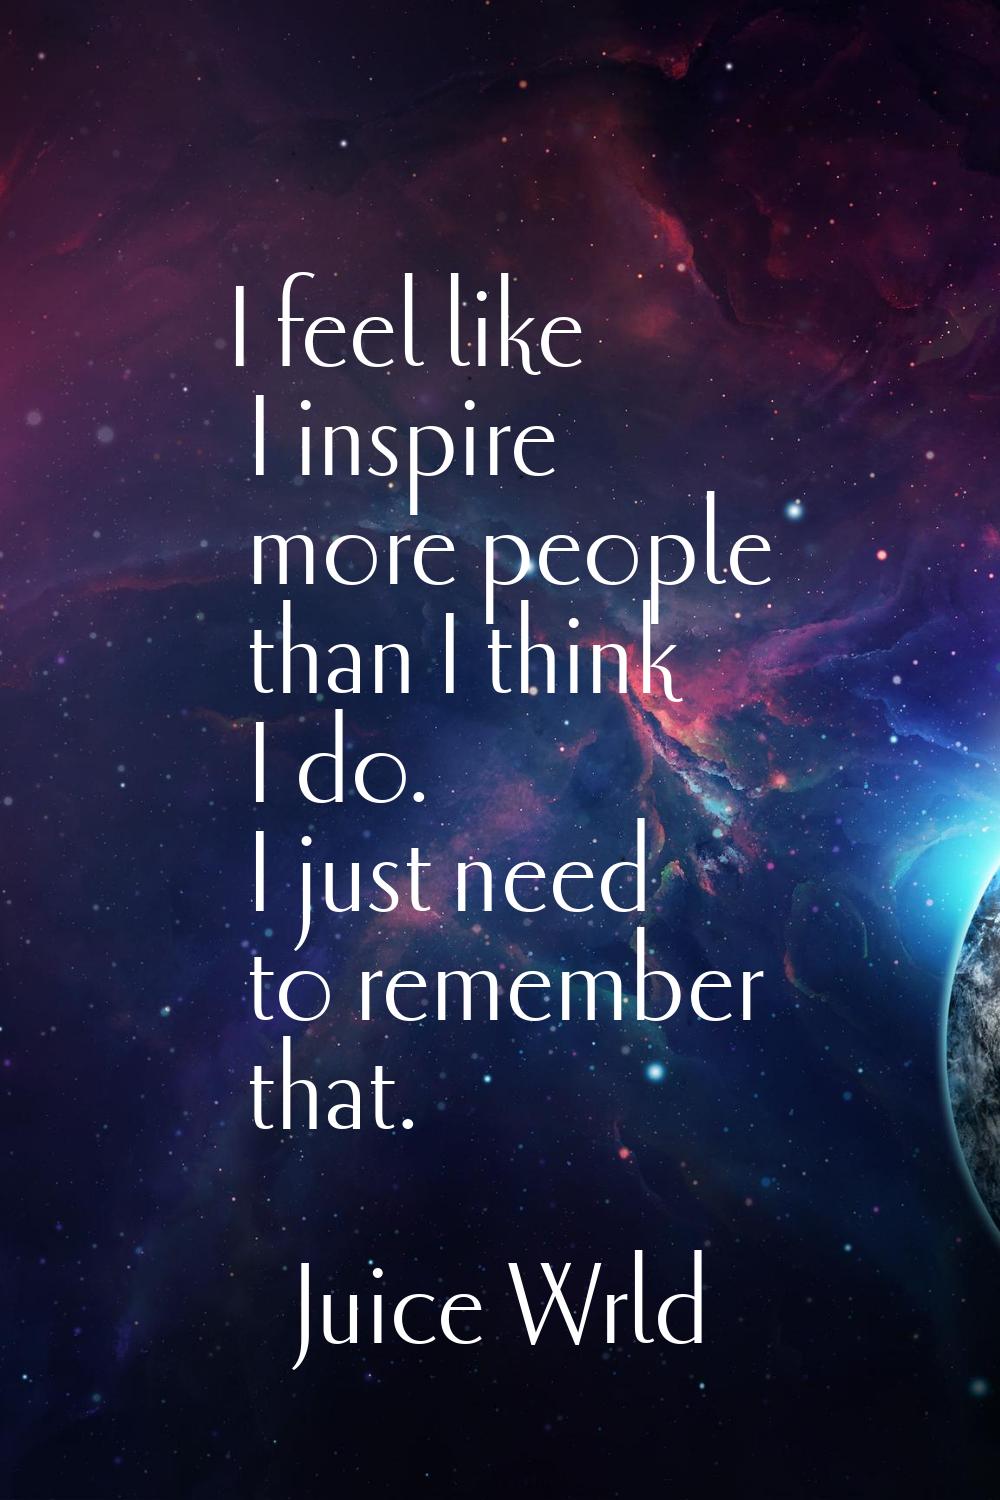 I feel like I inspire more people than I think I do. I just need to remember that.